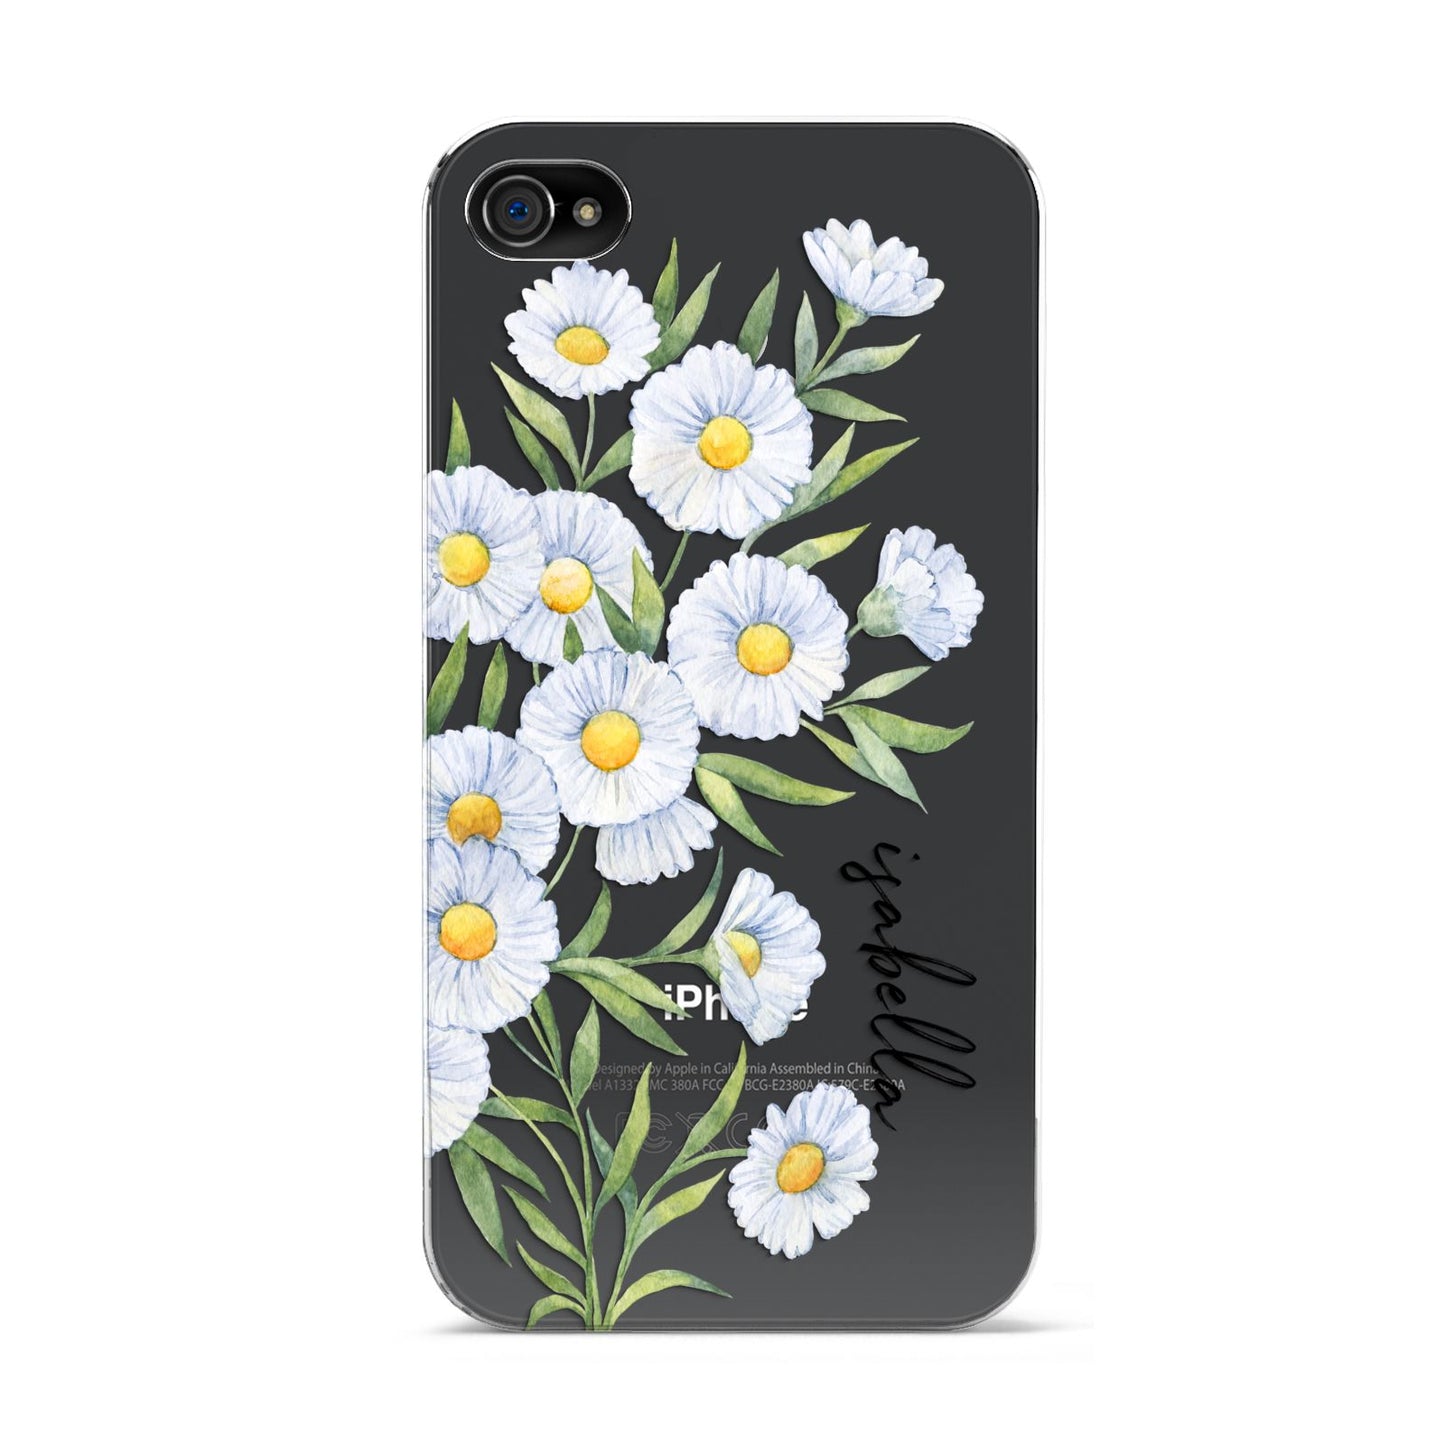 Personalised Daisy Flower Apple iPhone 4s Case